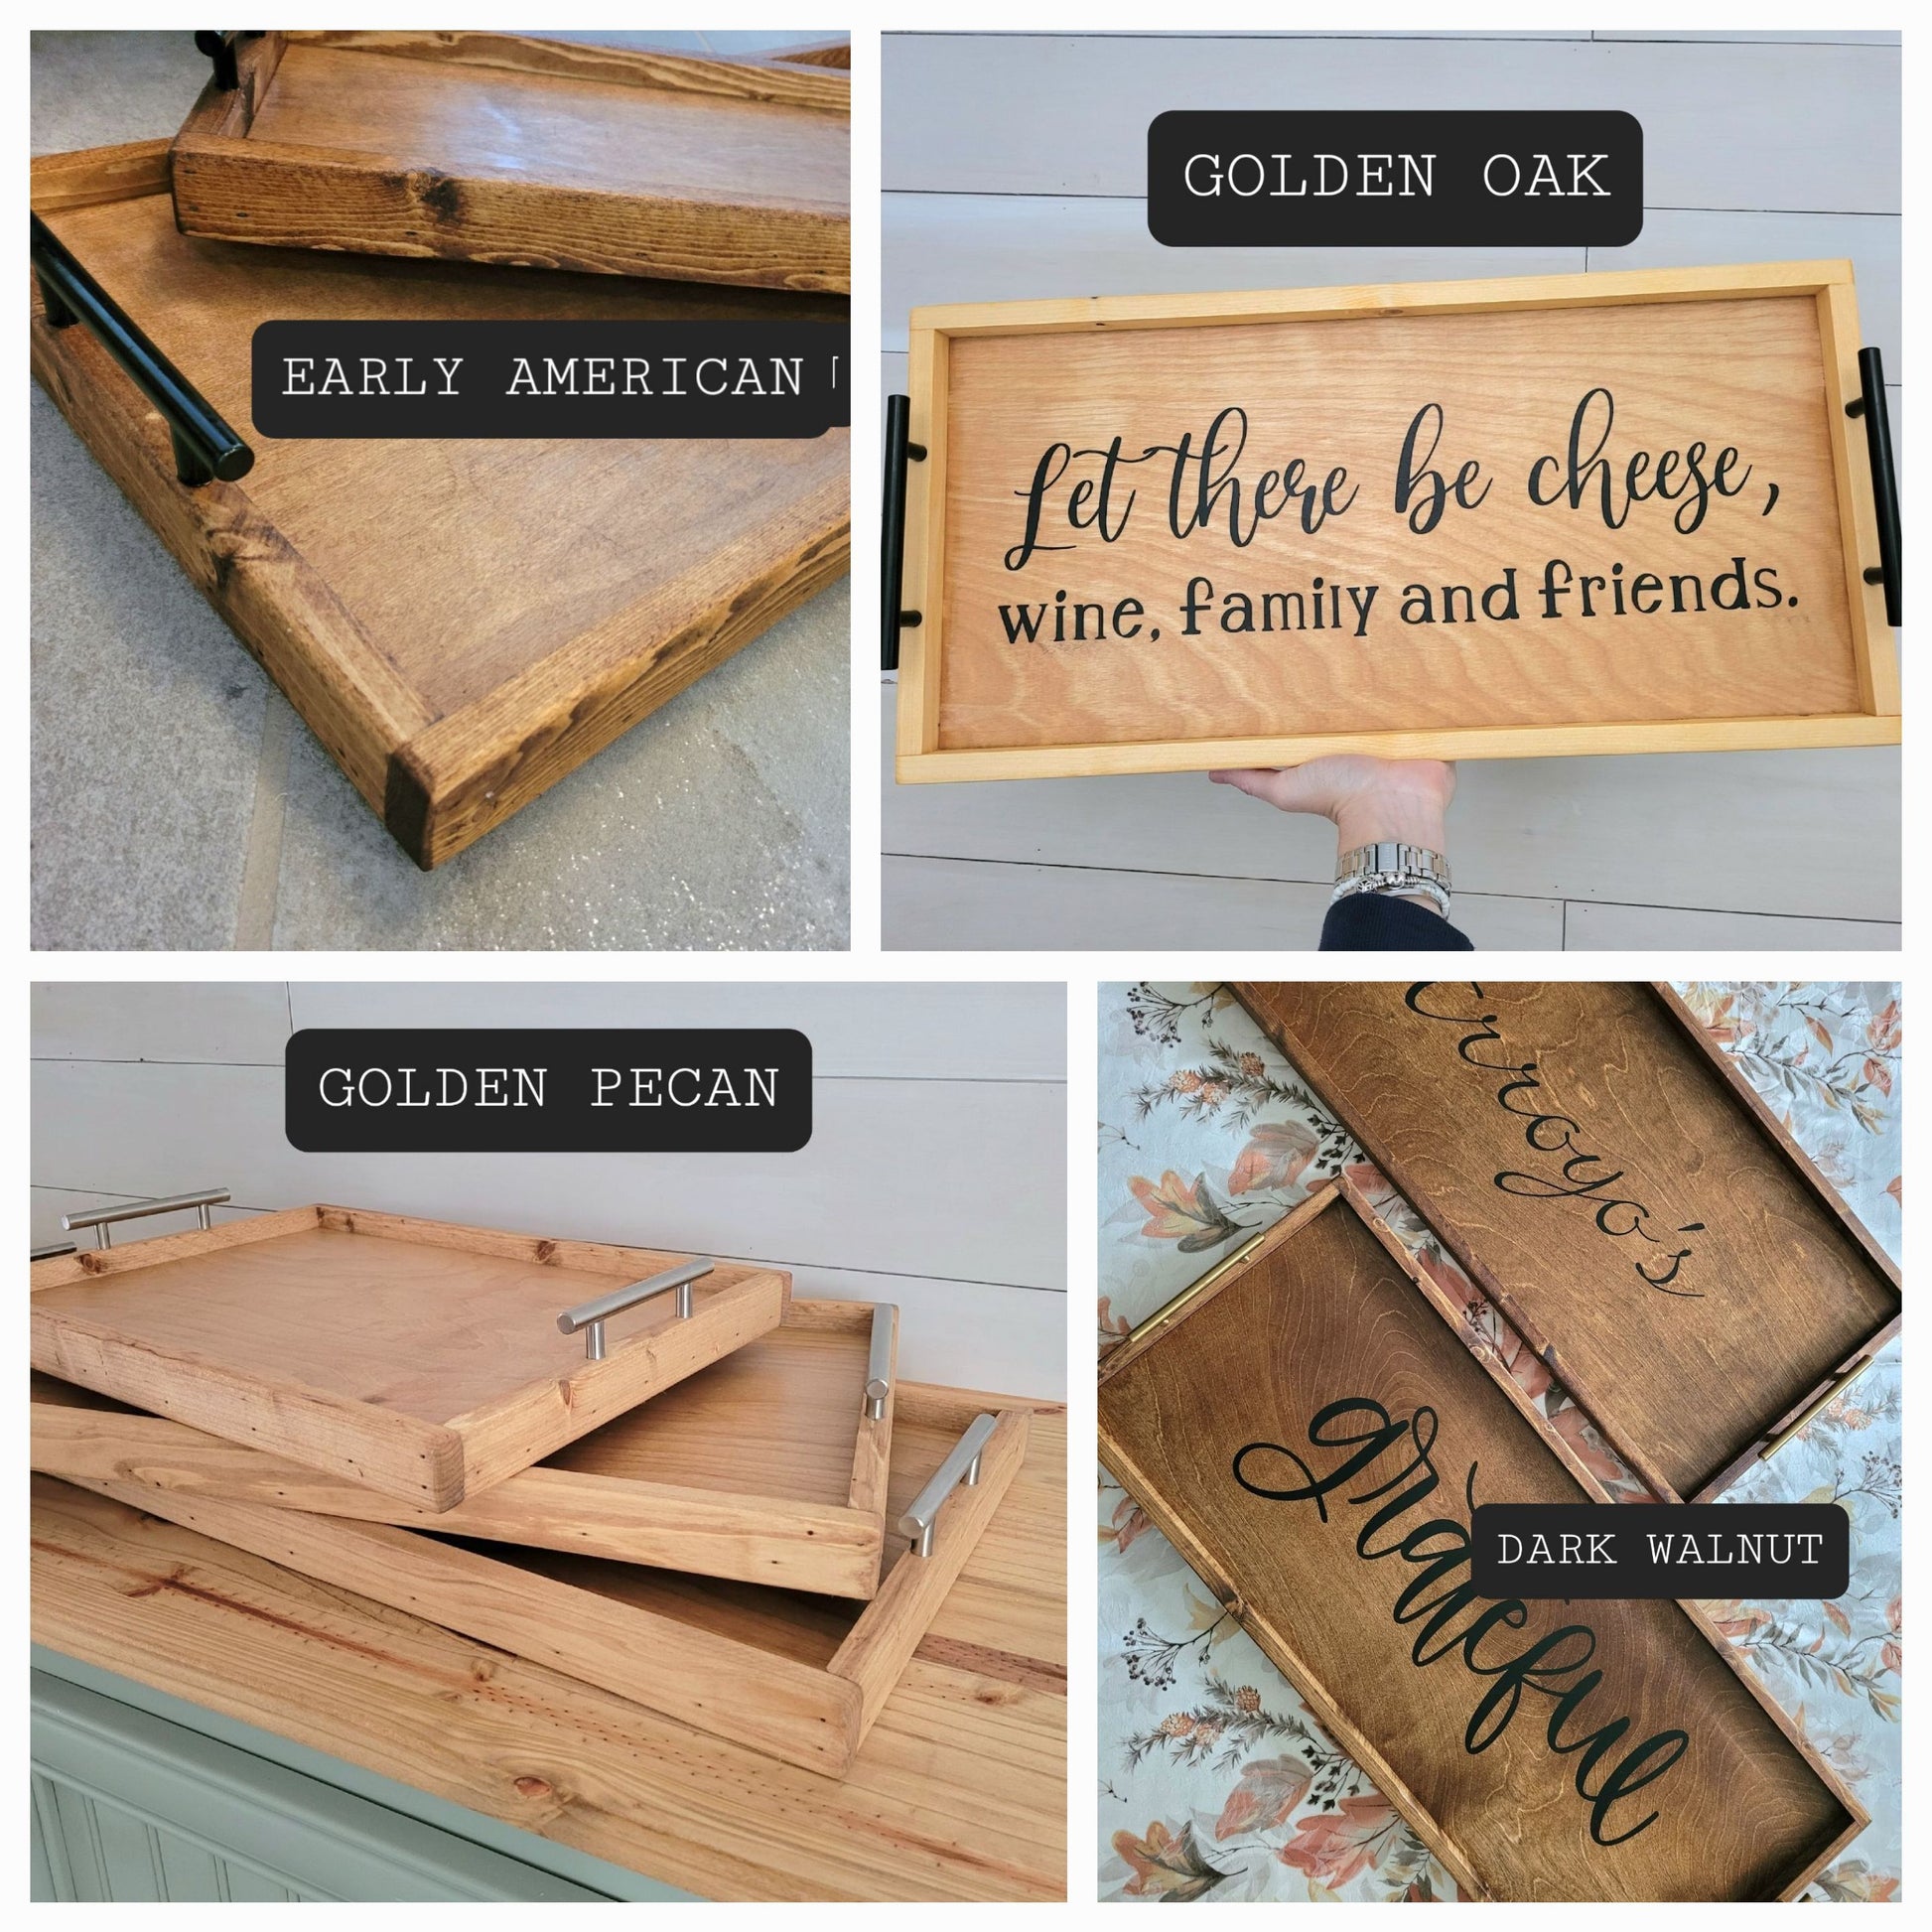 Customized charcuterie serving tray with personalized text